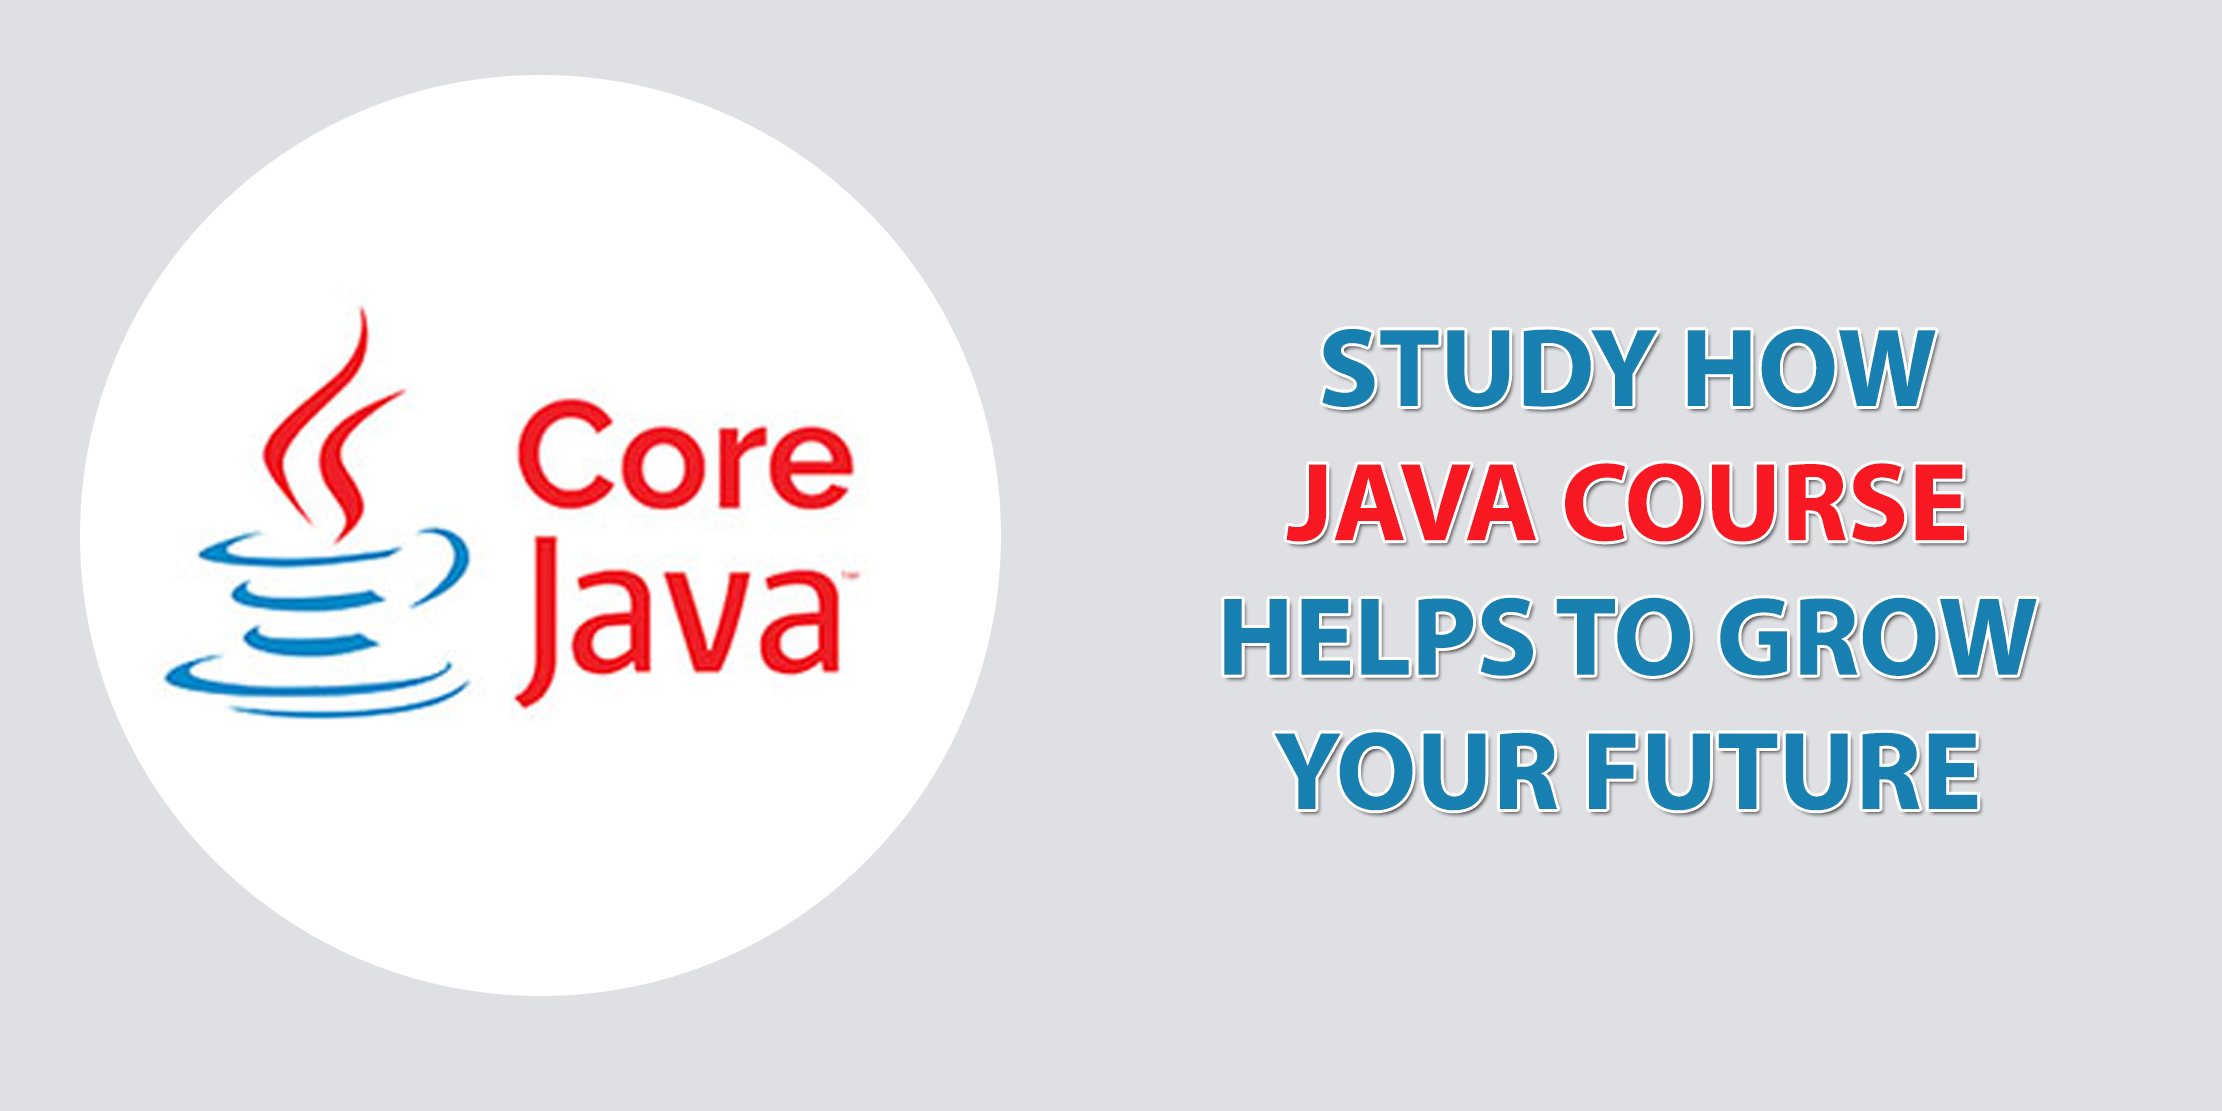 Study How Java Course Helps to Grow Your Future